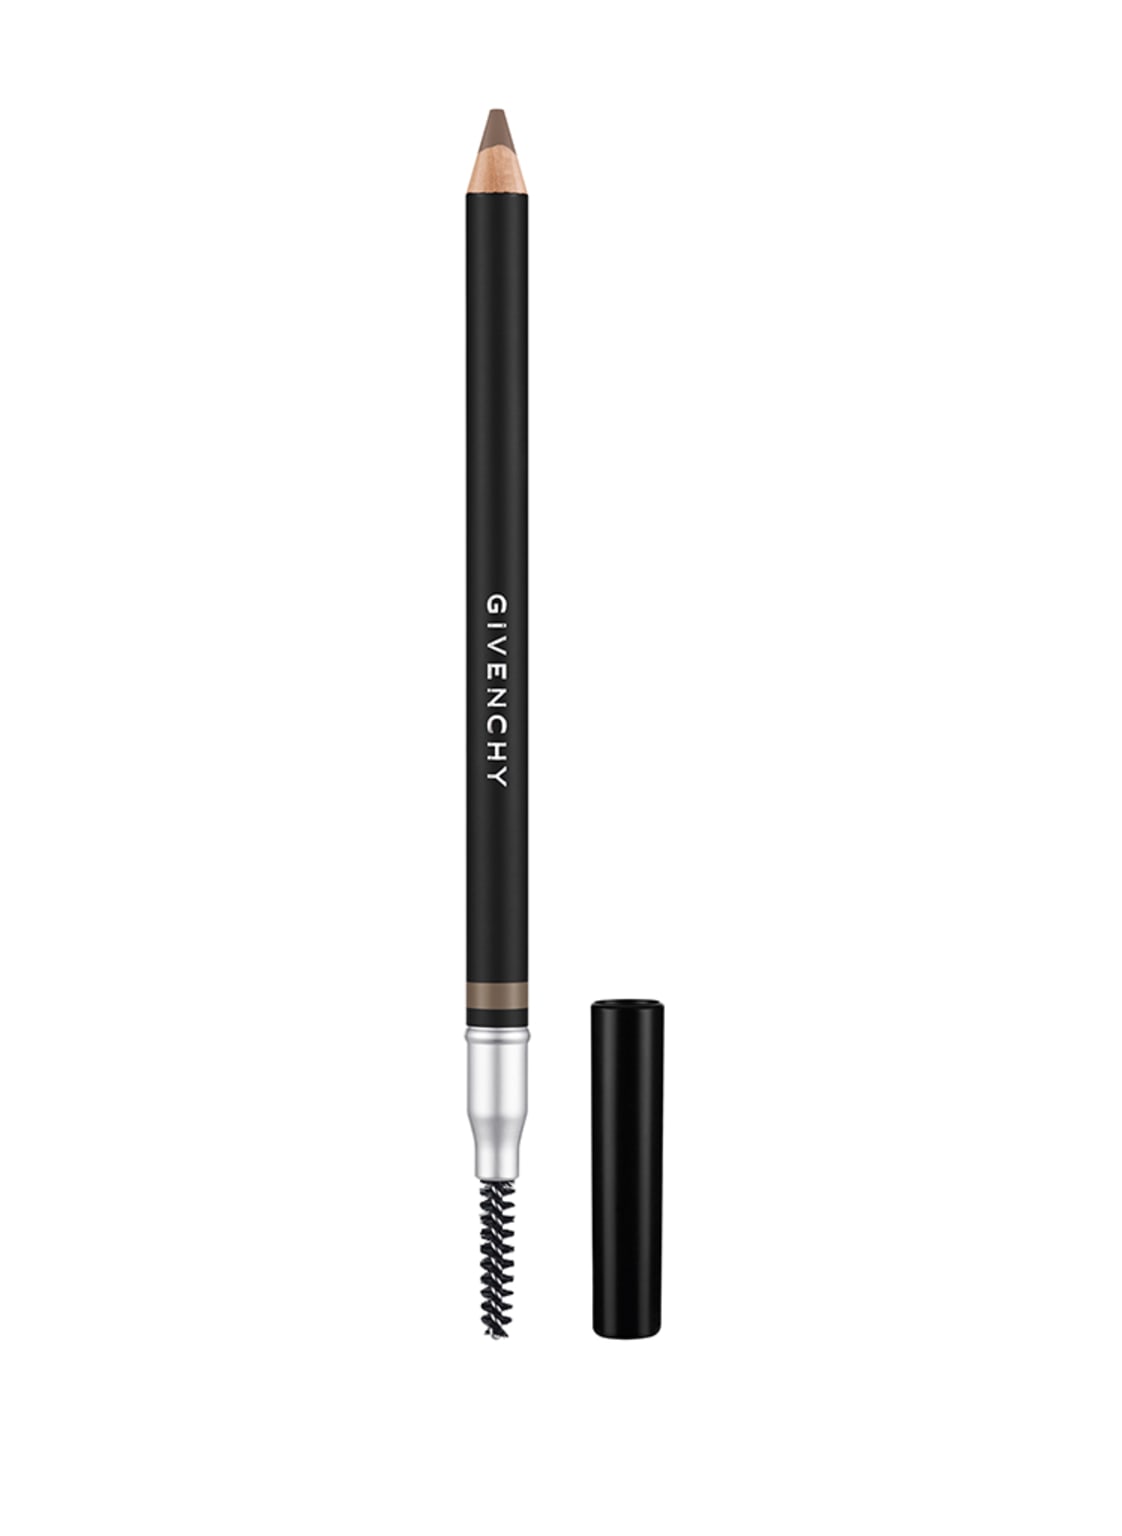 Givenchy Beauty Mister Eyebrow Augenbrauenstift von GIVENCHY BEAUTY